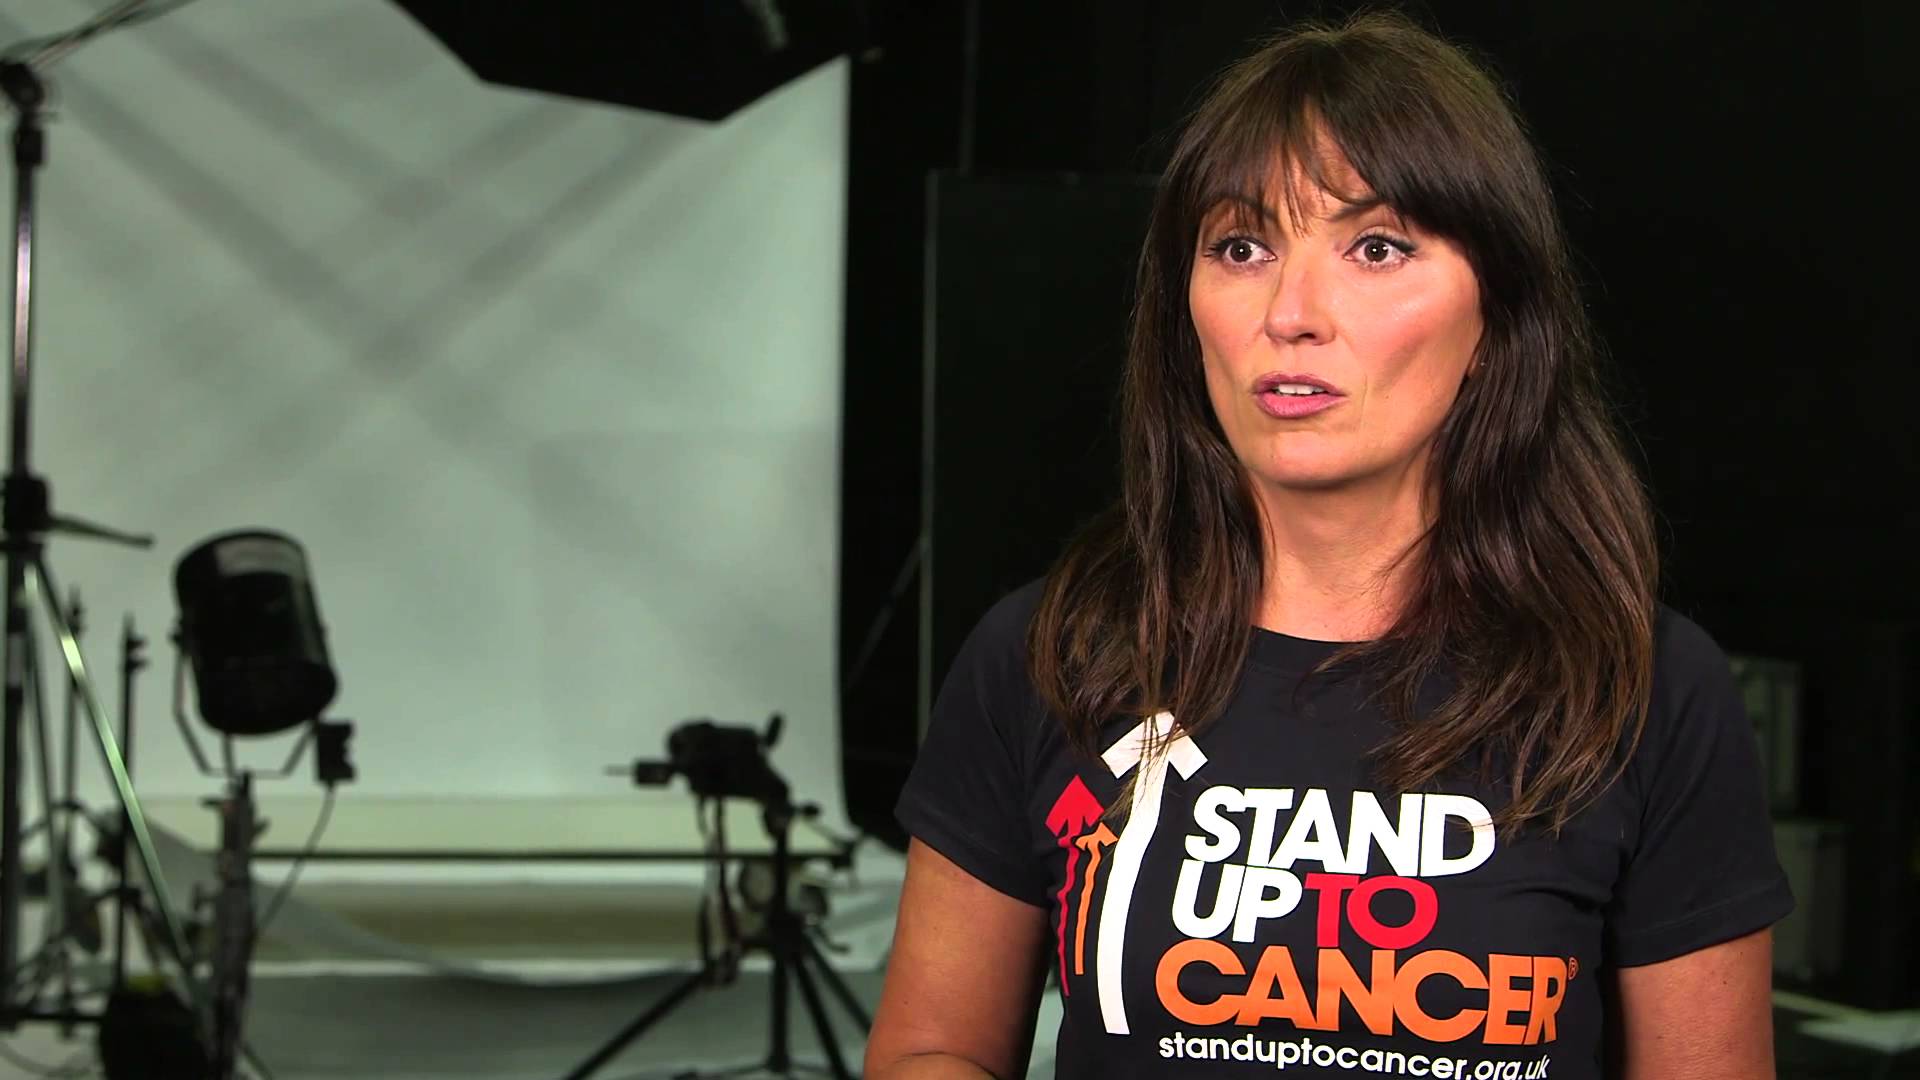 Artists Stand Up To Cancer Wallpaper Background Image